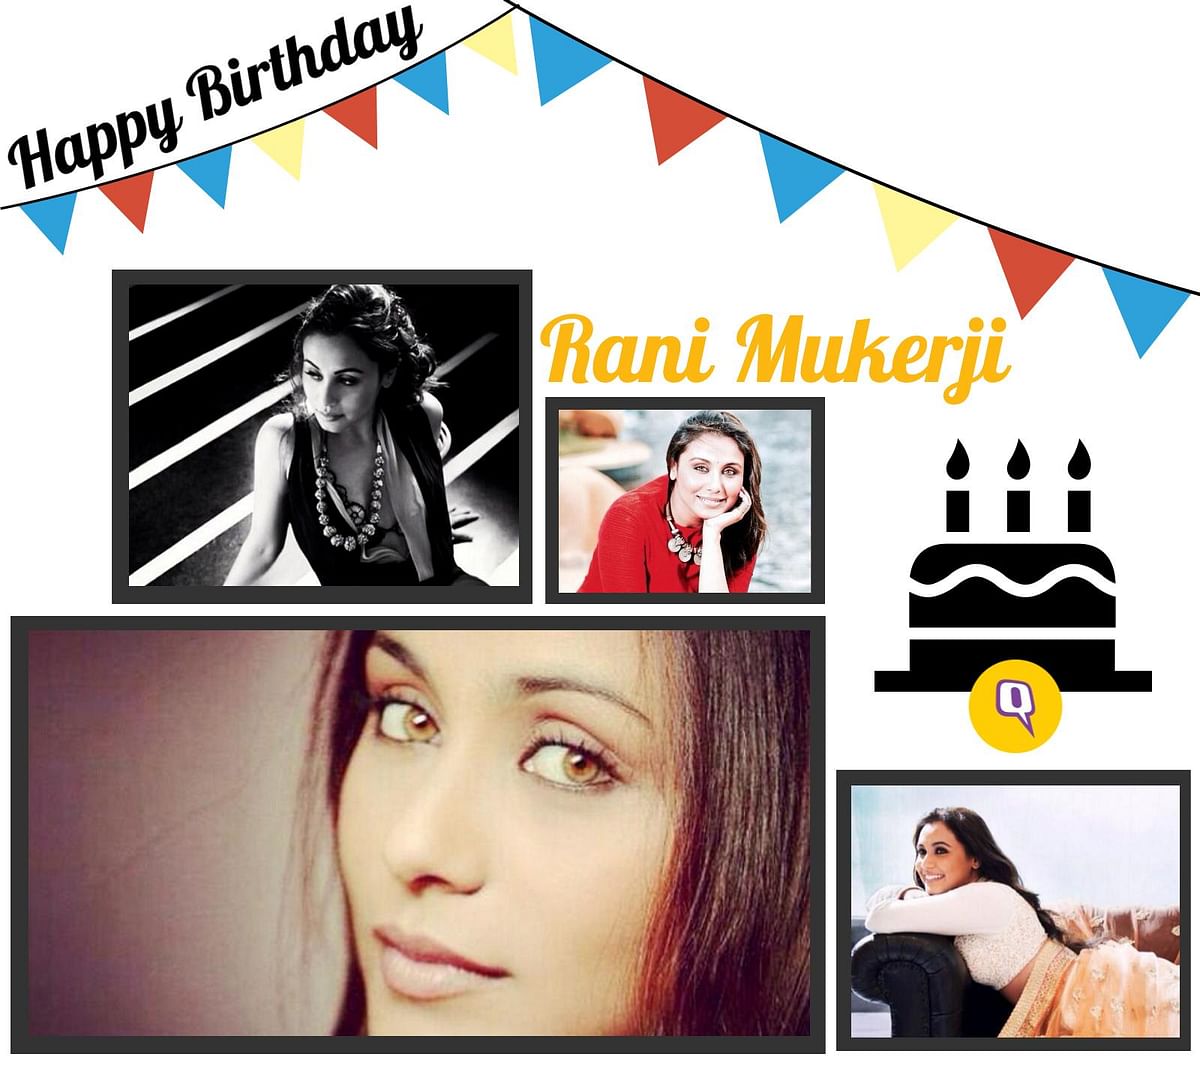 The Quint wishes Rani Mukerji a very happy 37th!